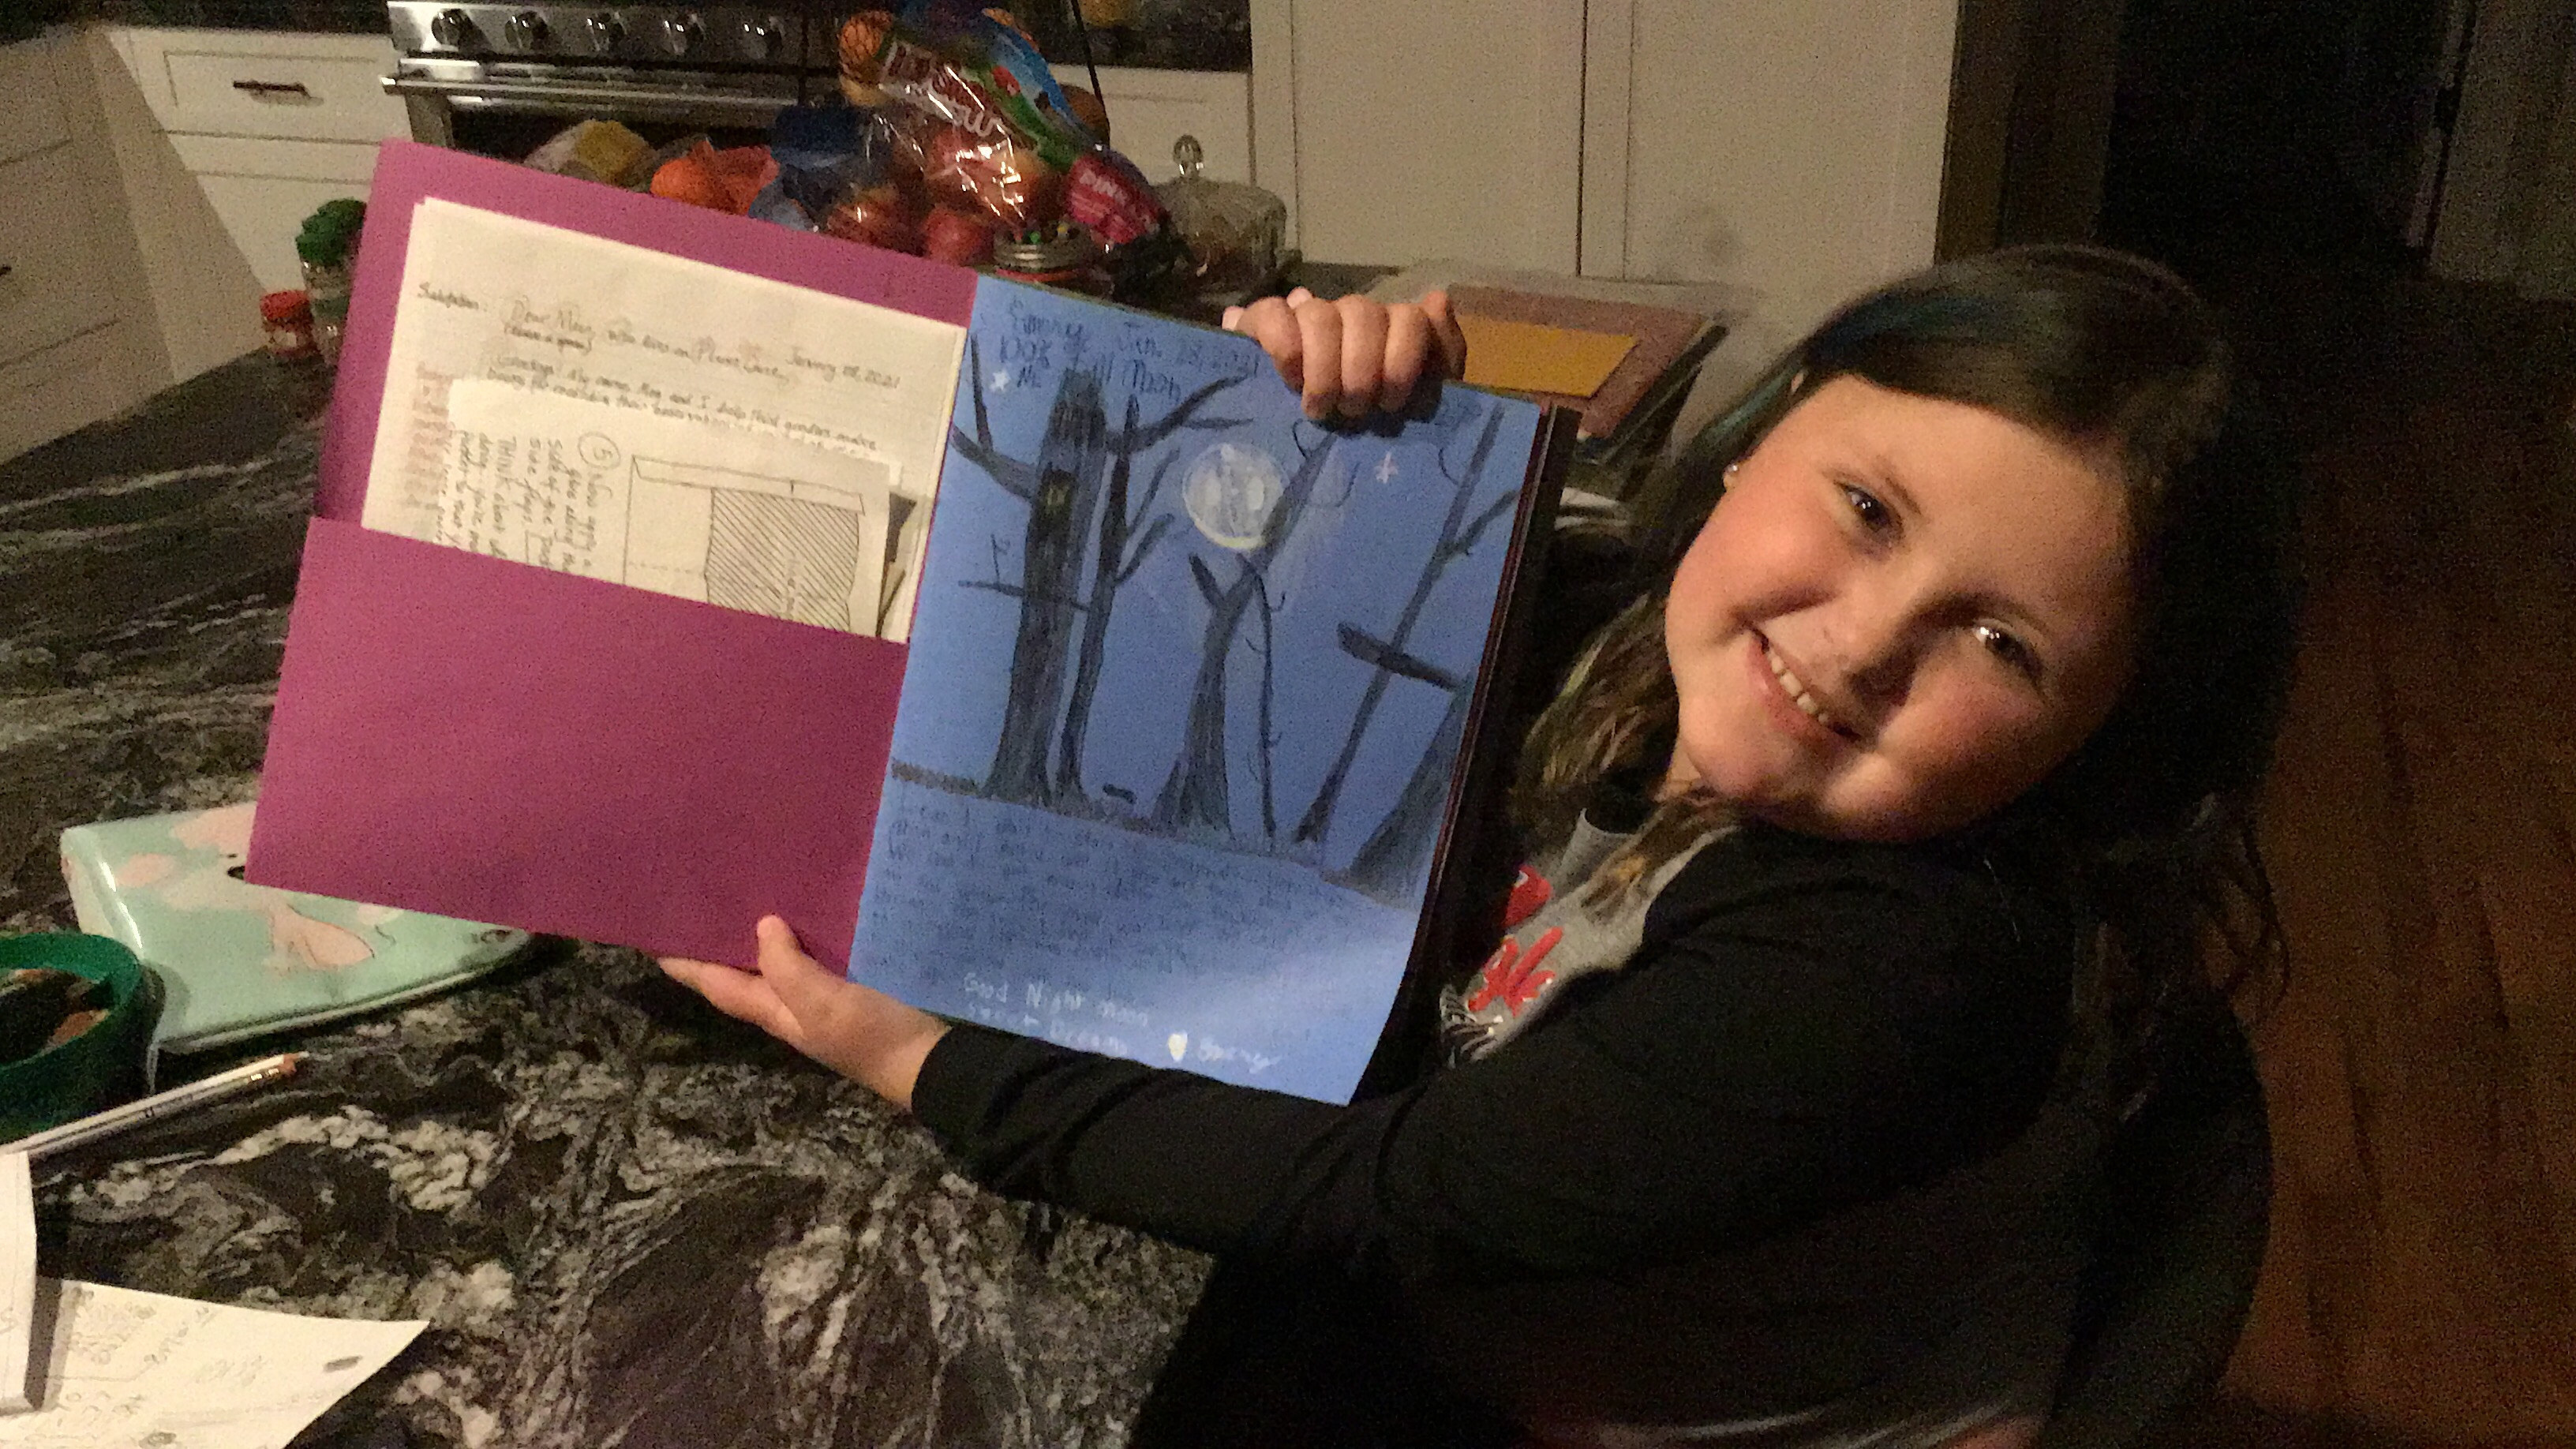 Emery Newton, a student in Michelle Stafford’s third-grade class at Deyton, shows off her first entry in her moon journal. The moon journal project took on a new virtual format this year. (Submitted)